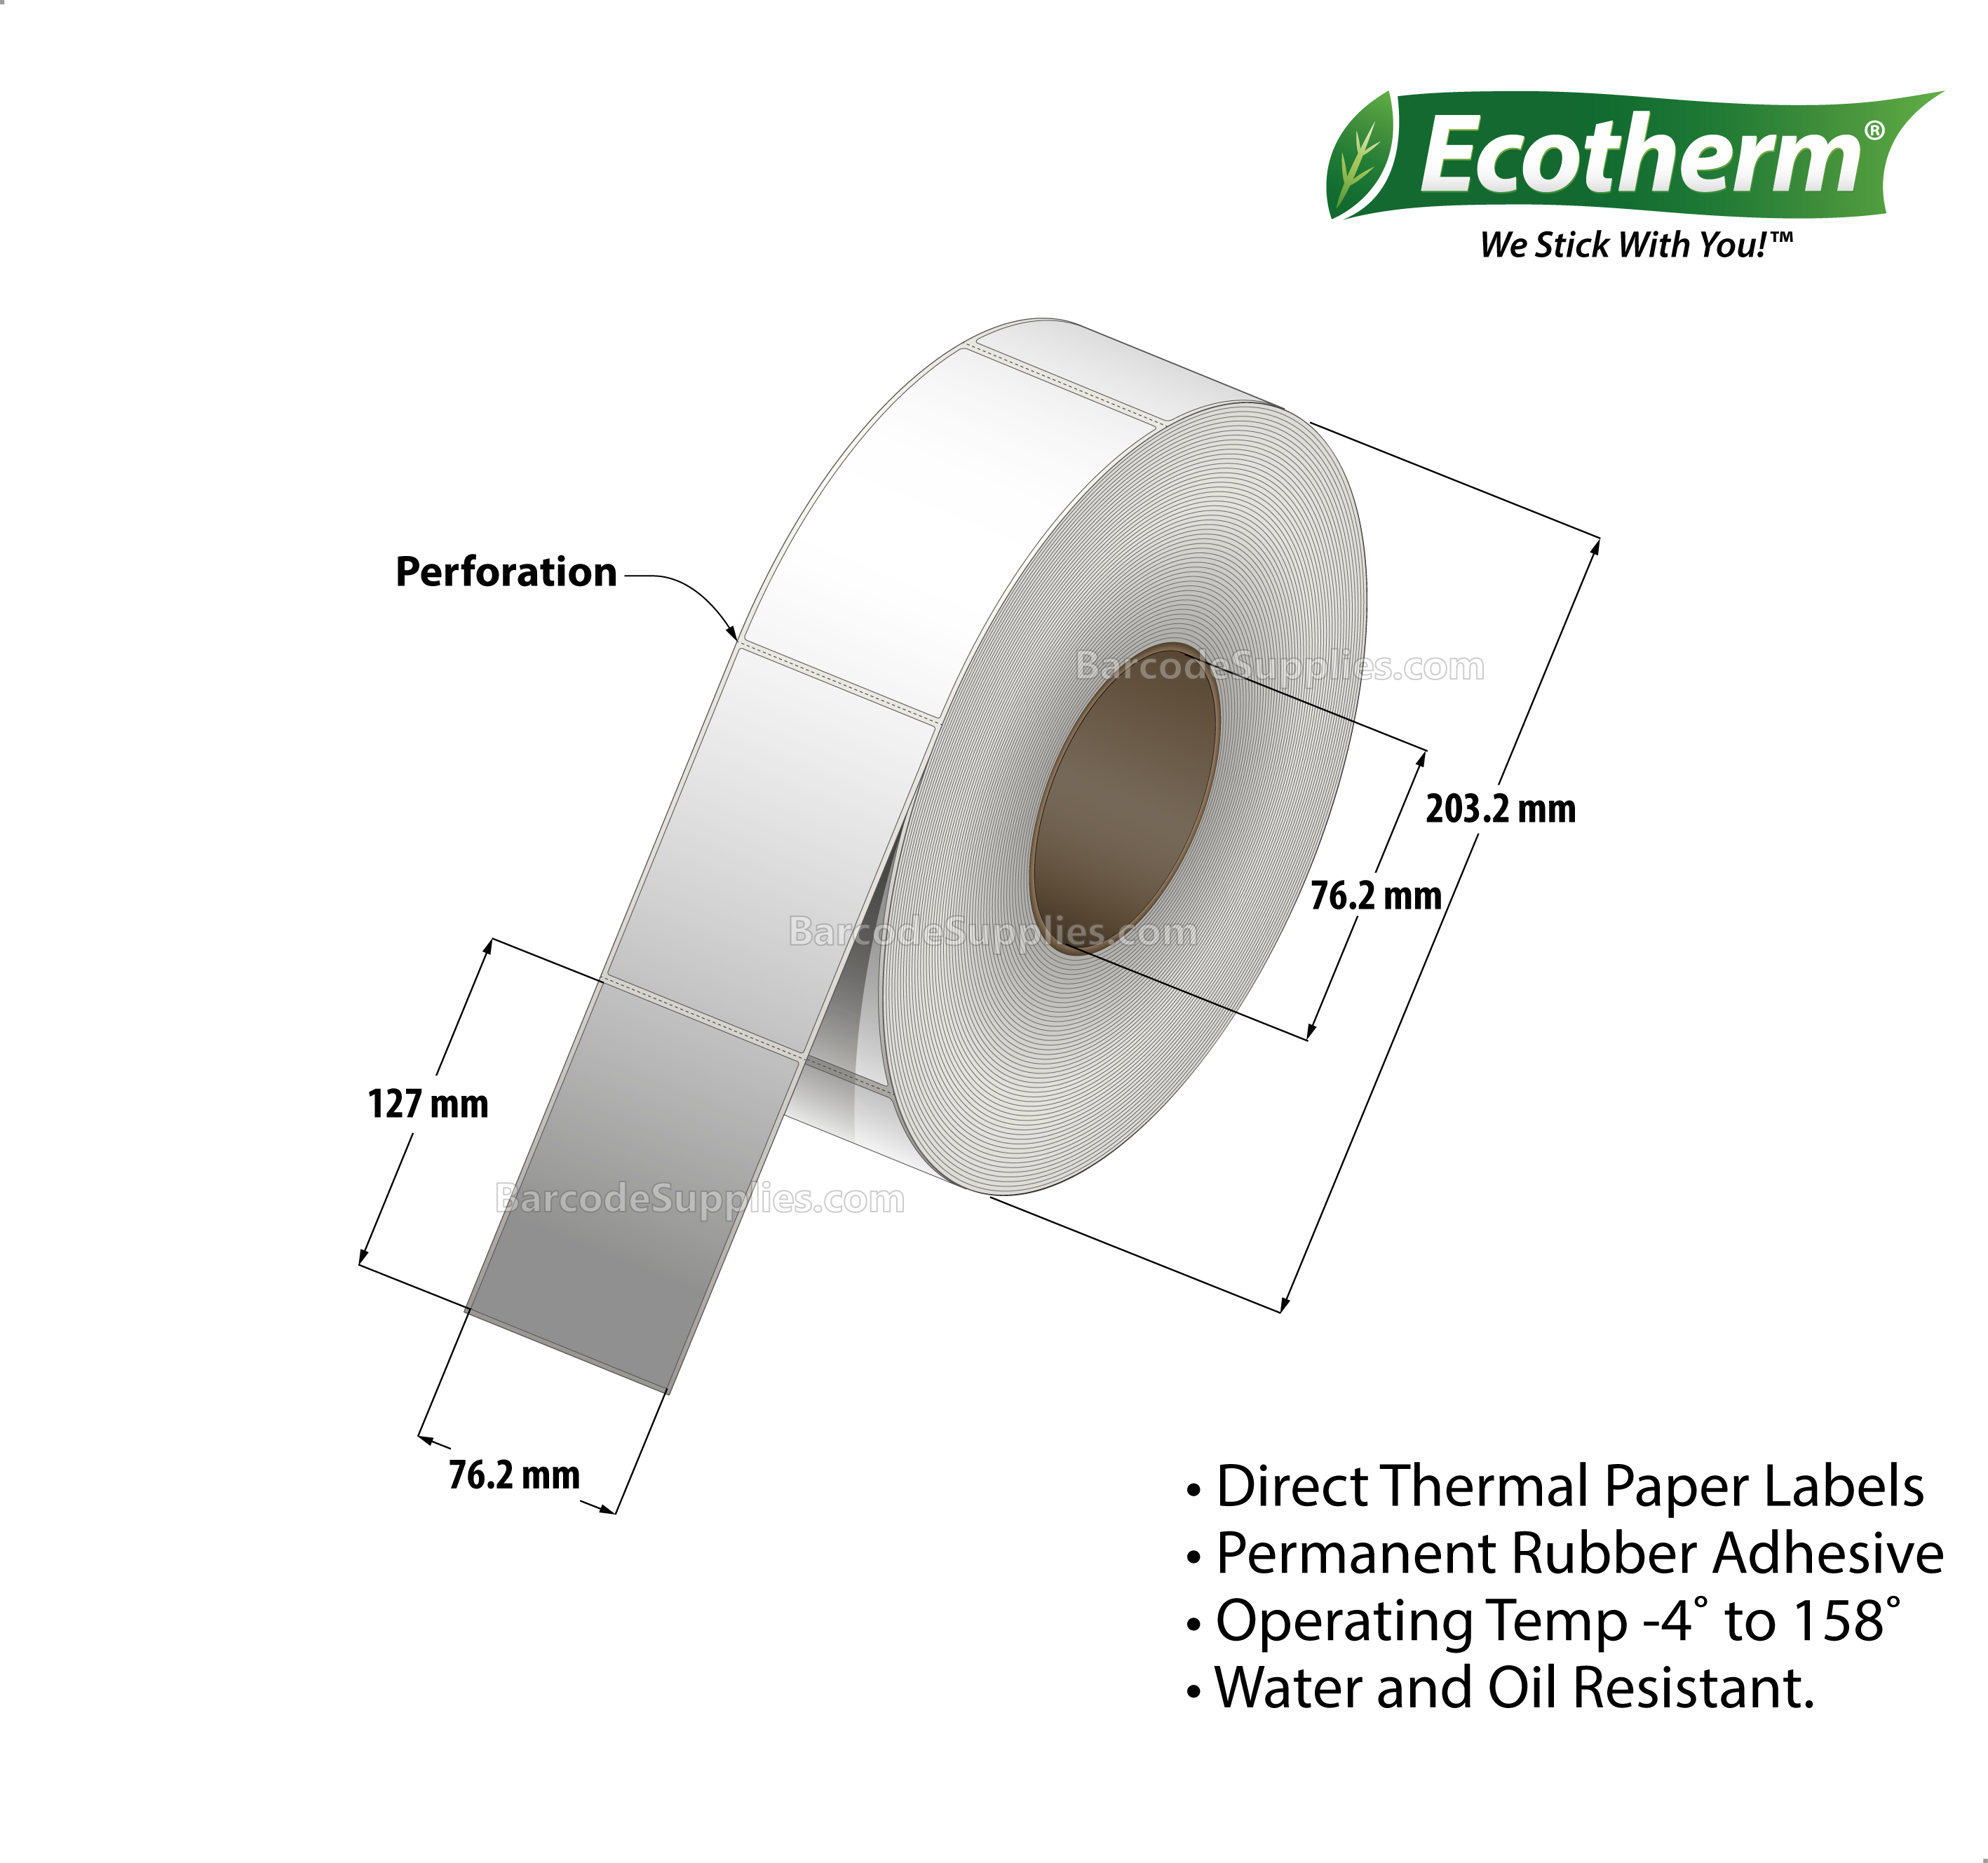 3 x 5 Direct Thermal White Labels With Rubber Adhesive - Perforated - 1250 Labels Per Roll - Carton Of 4 Rolls - 5000 Labels Total - MPN: ECOTHERM18114-4